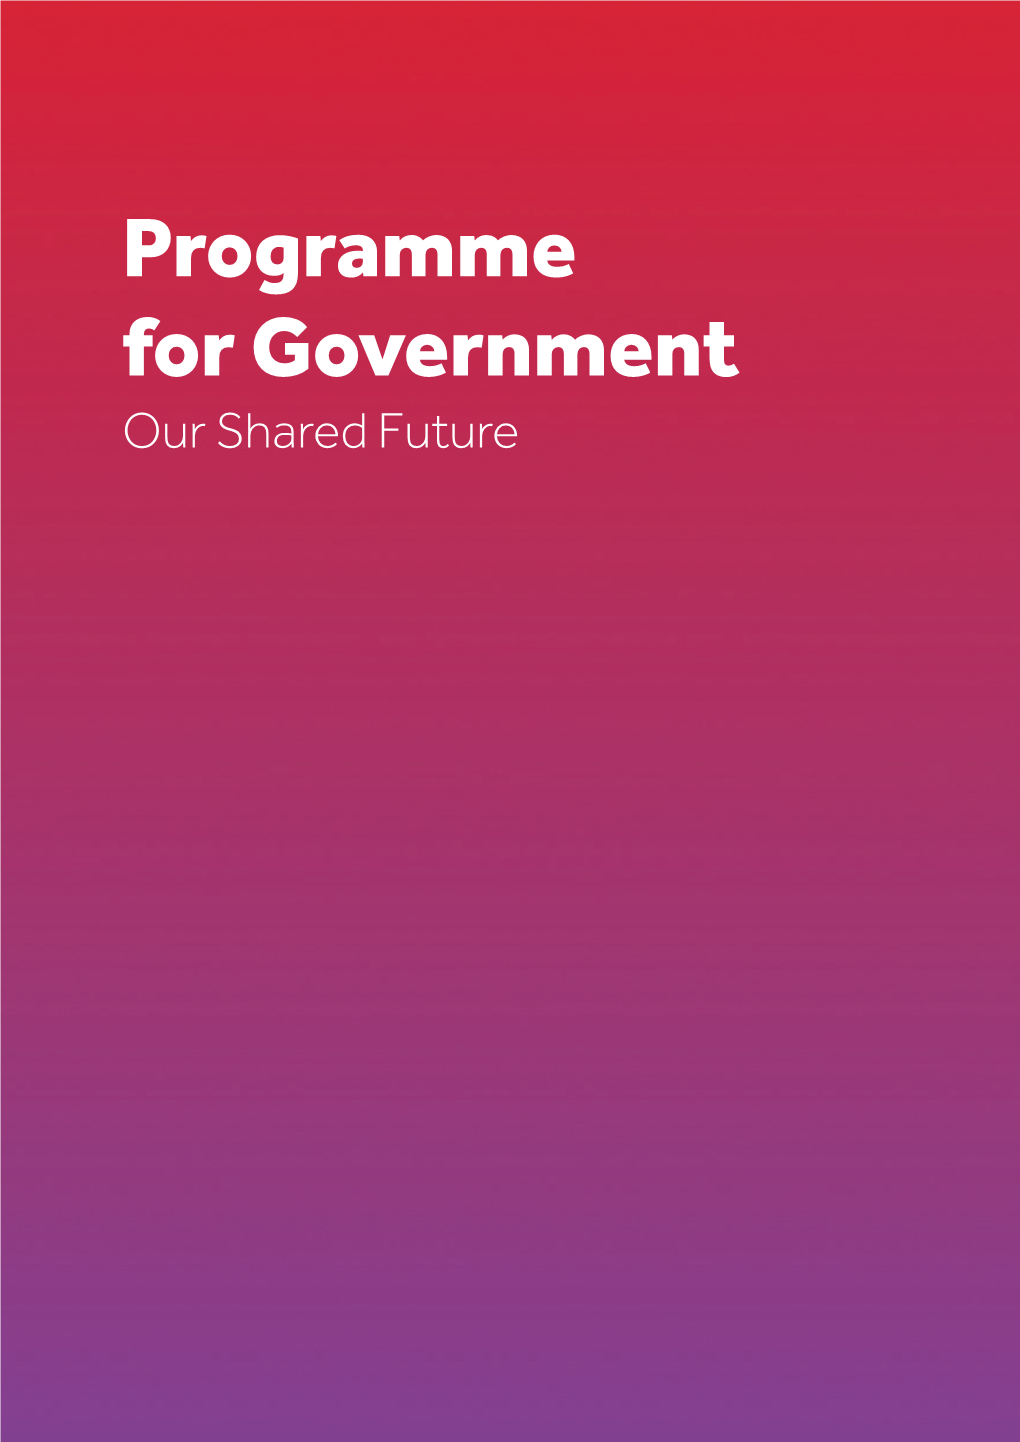 Programme for Government – Our Shared Future